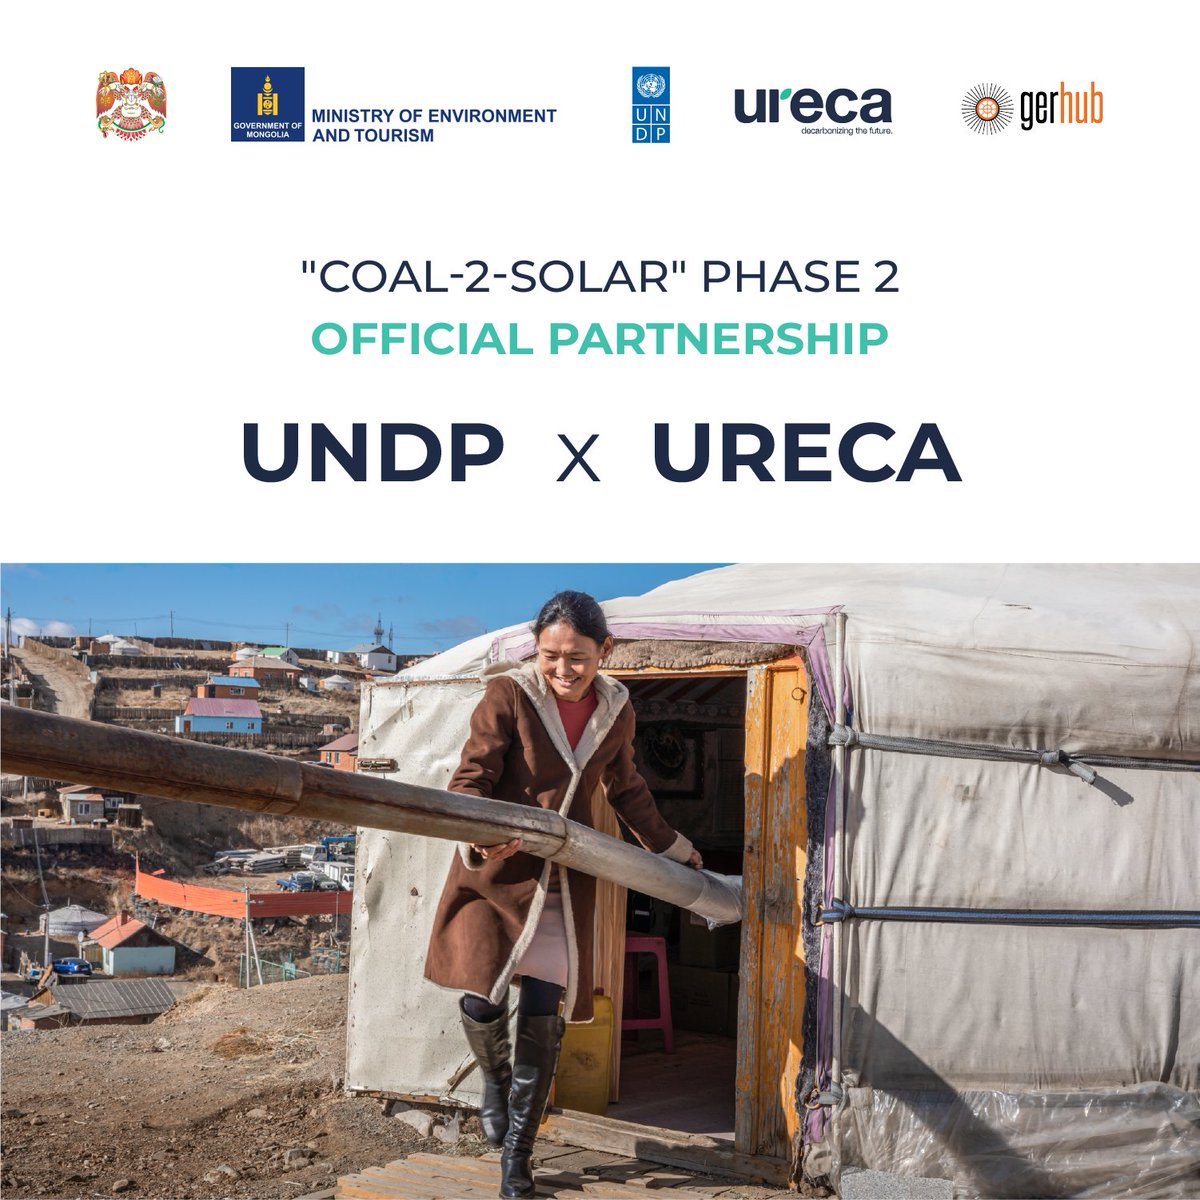 🌞 Exciting News from URECA! 🌞 We’re excited to announce that we're partnering with UNDP to expand our ‘Coal-to-Solar’ initiative in Ulaanbaatar’s Ger districts. We're bringing clean energy to 100 more women-led families! #URECA #CoalToSolar #CleanEnergy